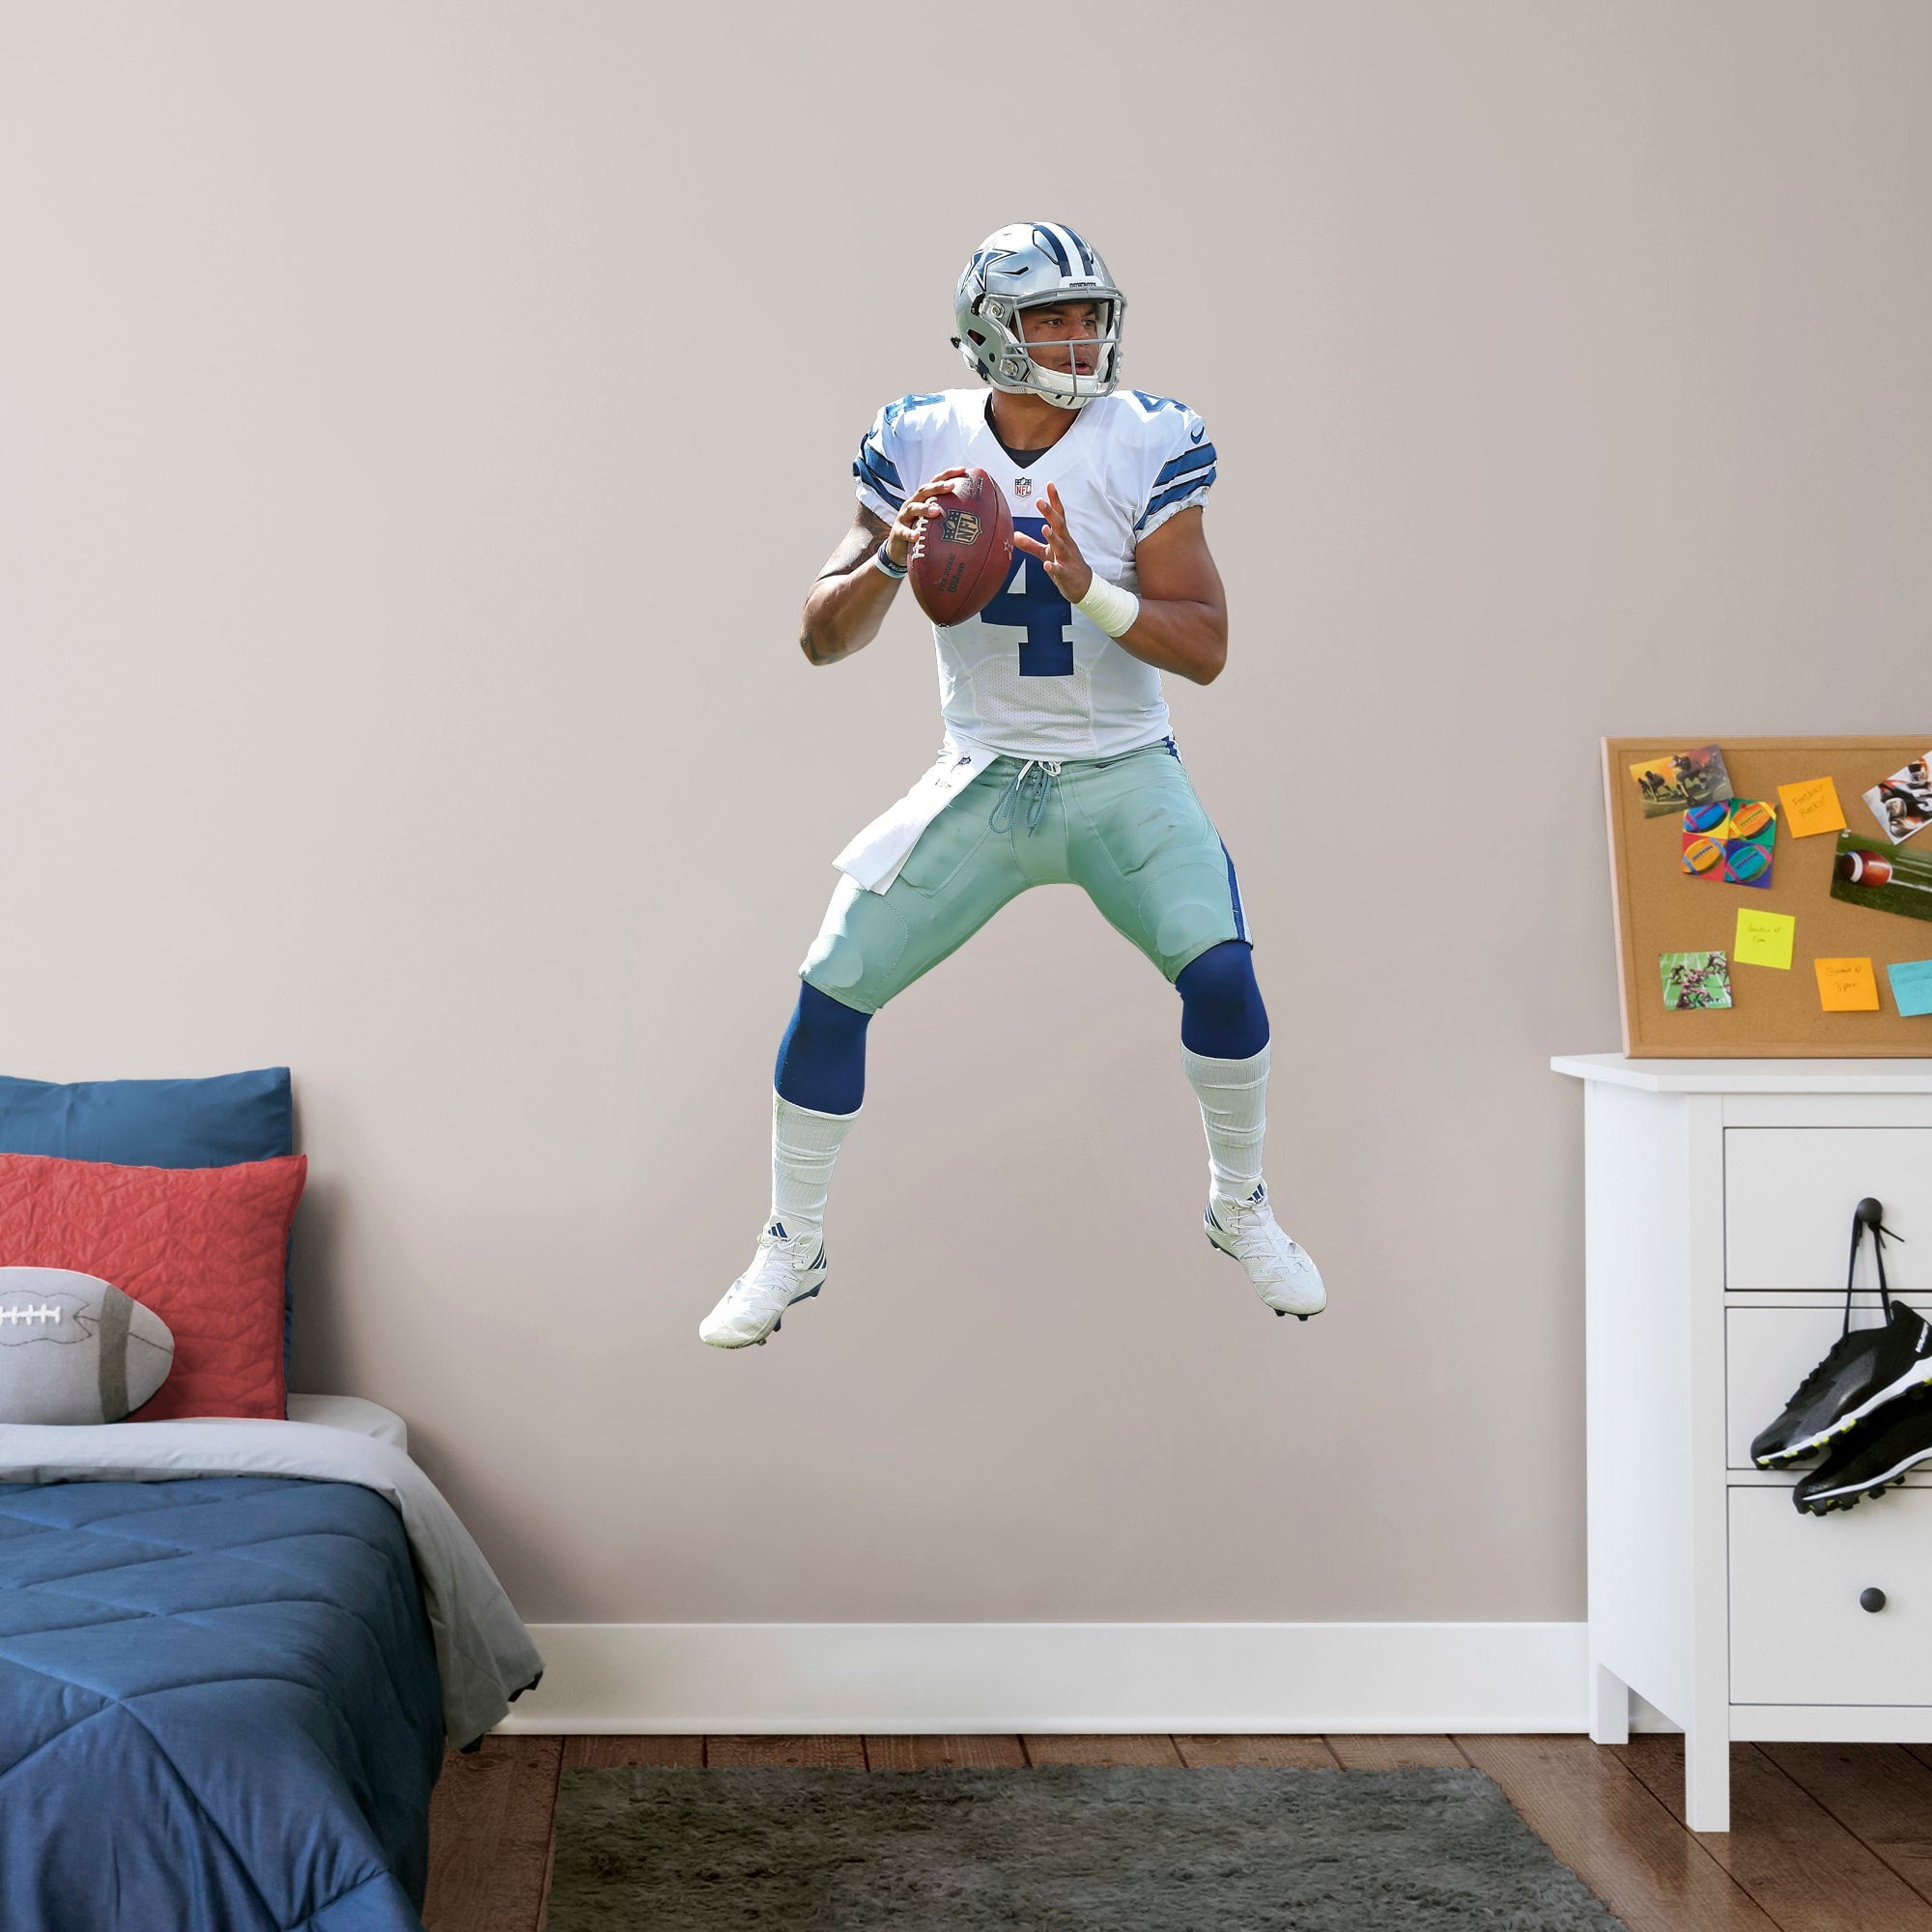 Dak Prescott for Dallas Cowboys - Officially Licensed NFL Removable Wall Decal Giant Athlete + 2 Decals (28"W x 51"H) by Fathead